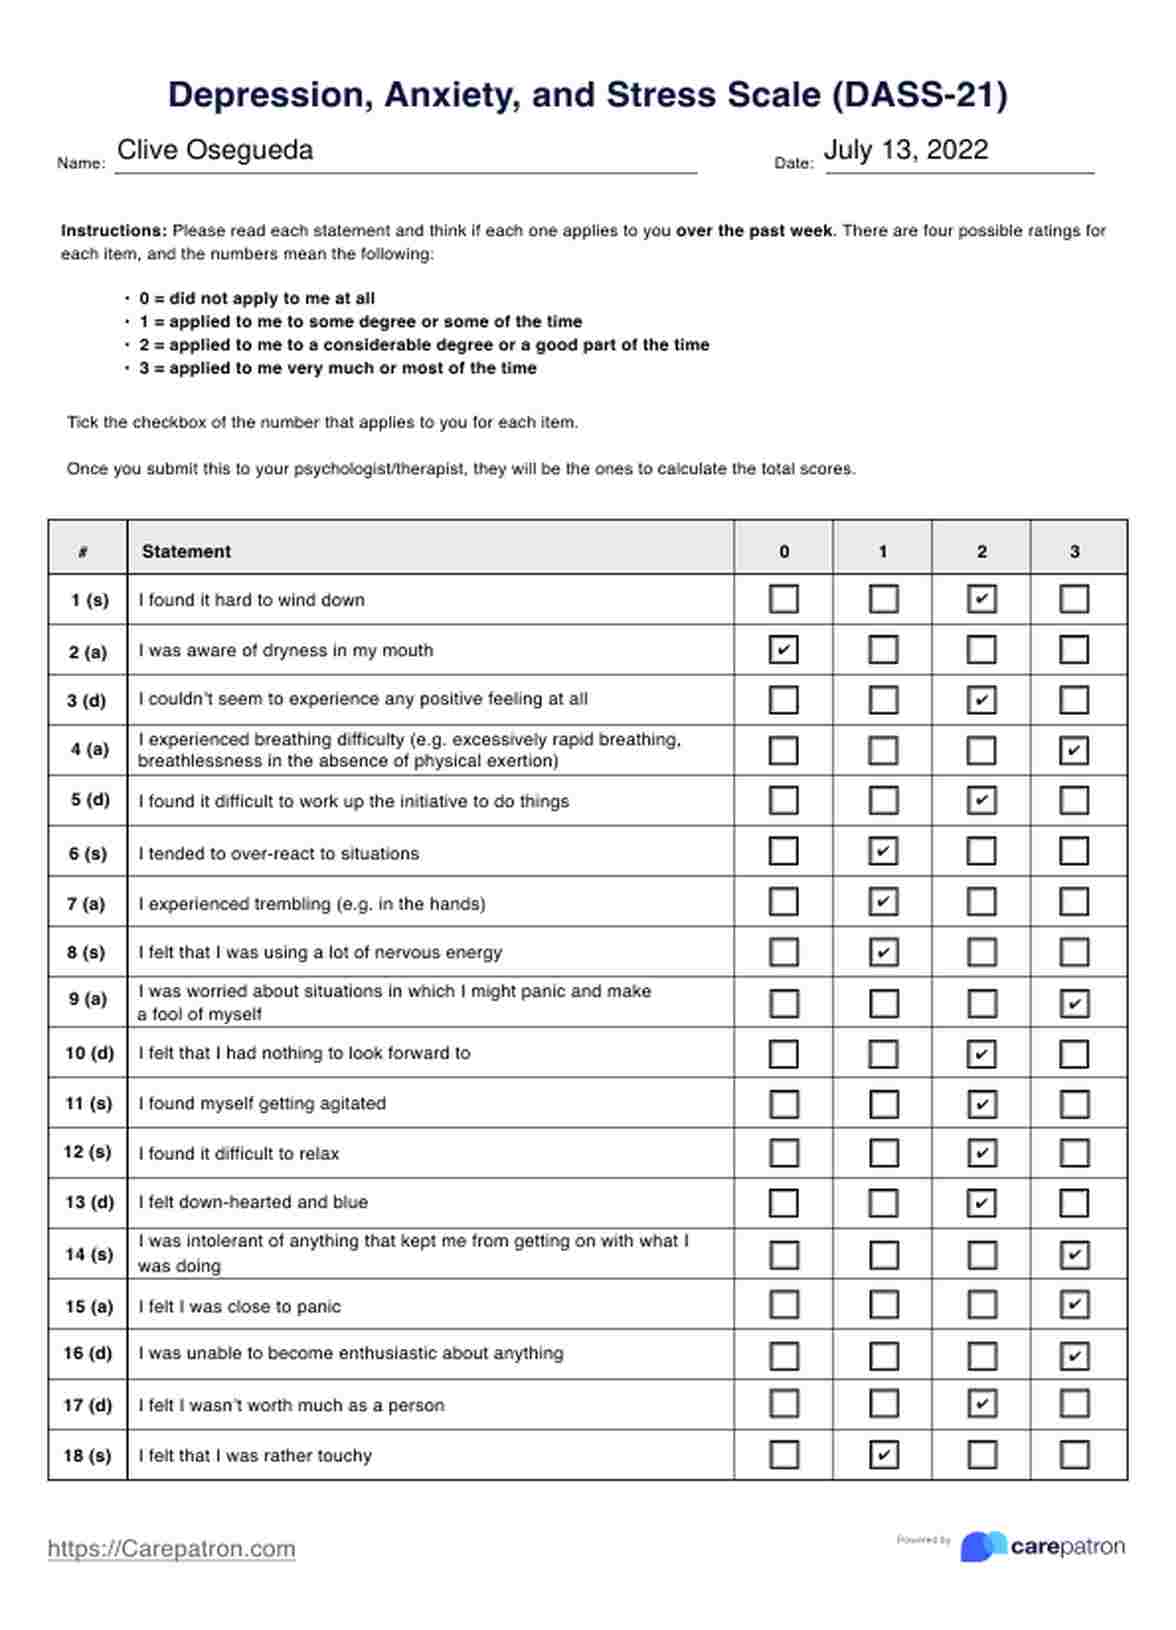 Depression Anxiety and Stress Scale (DASS-21) PDF Example